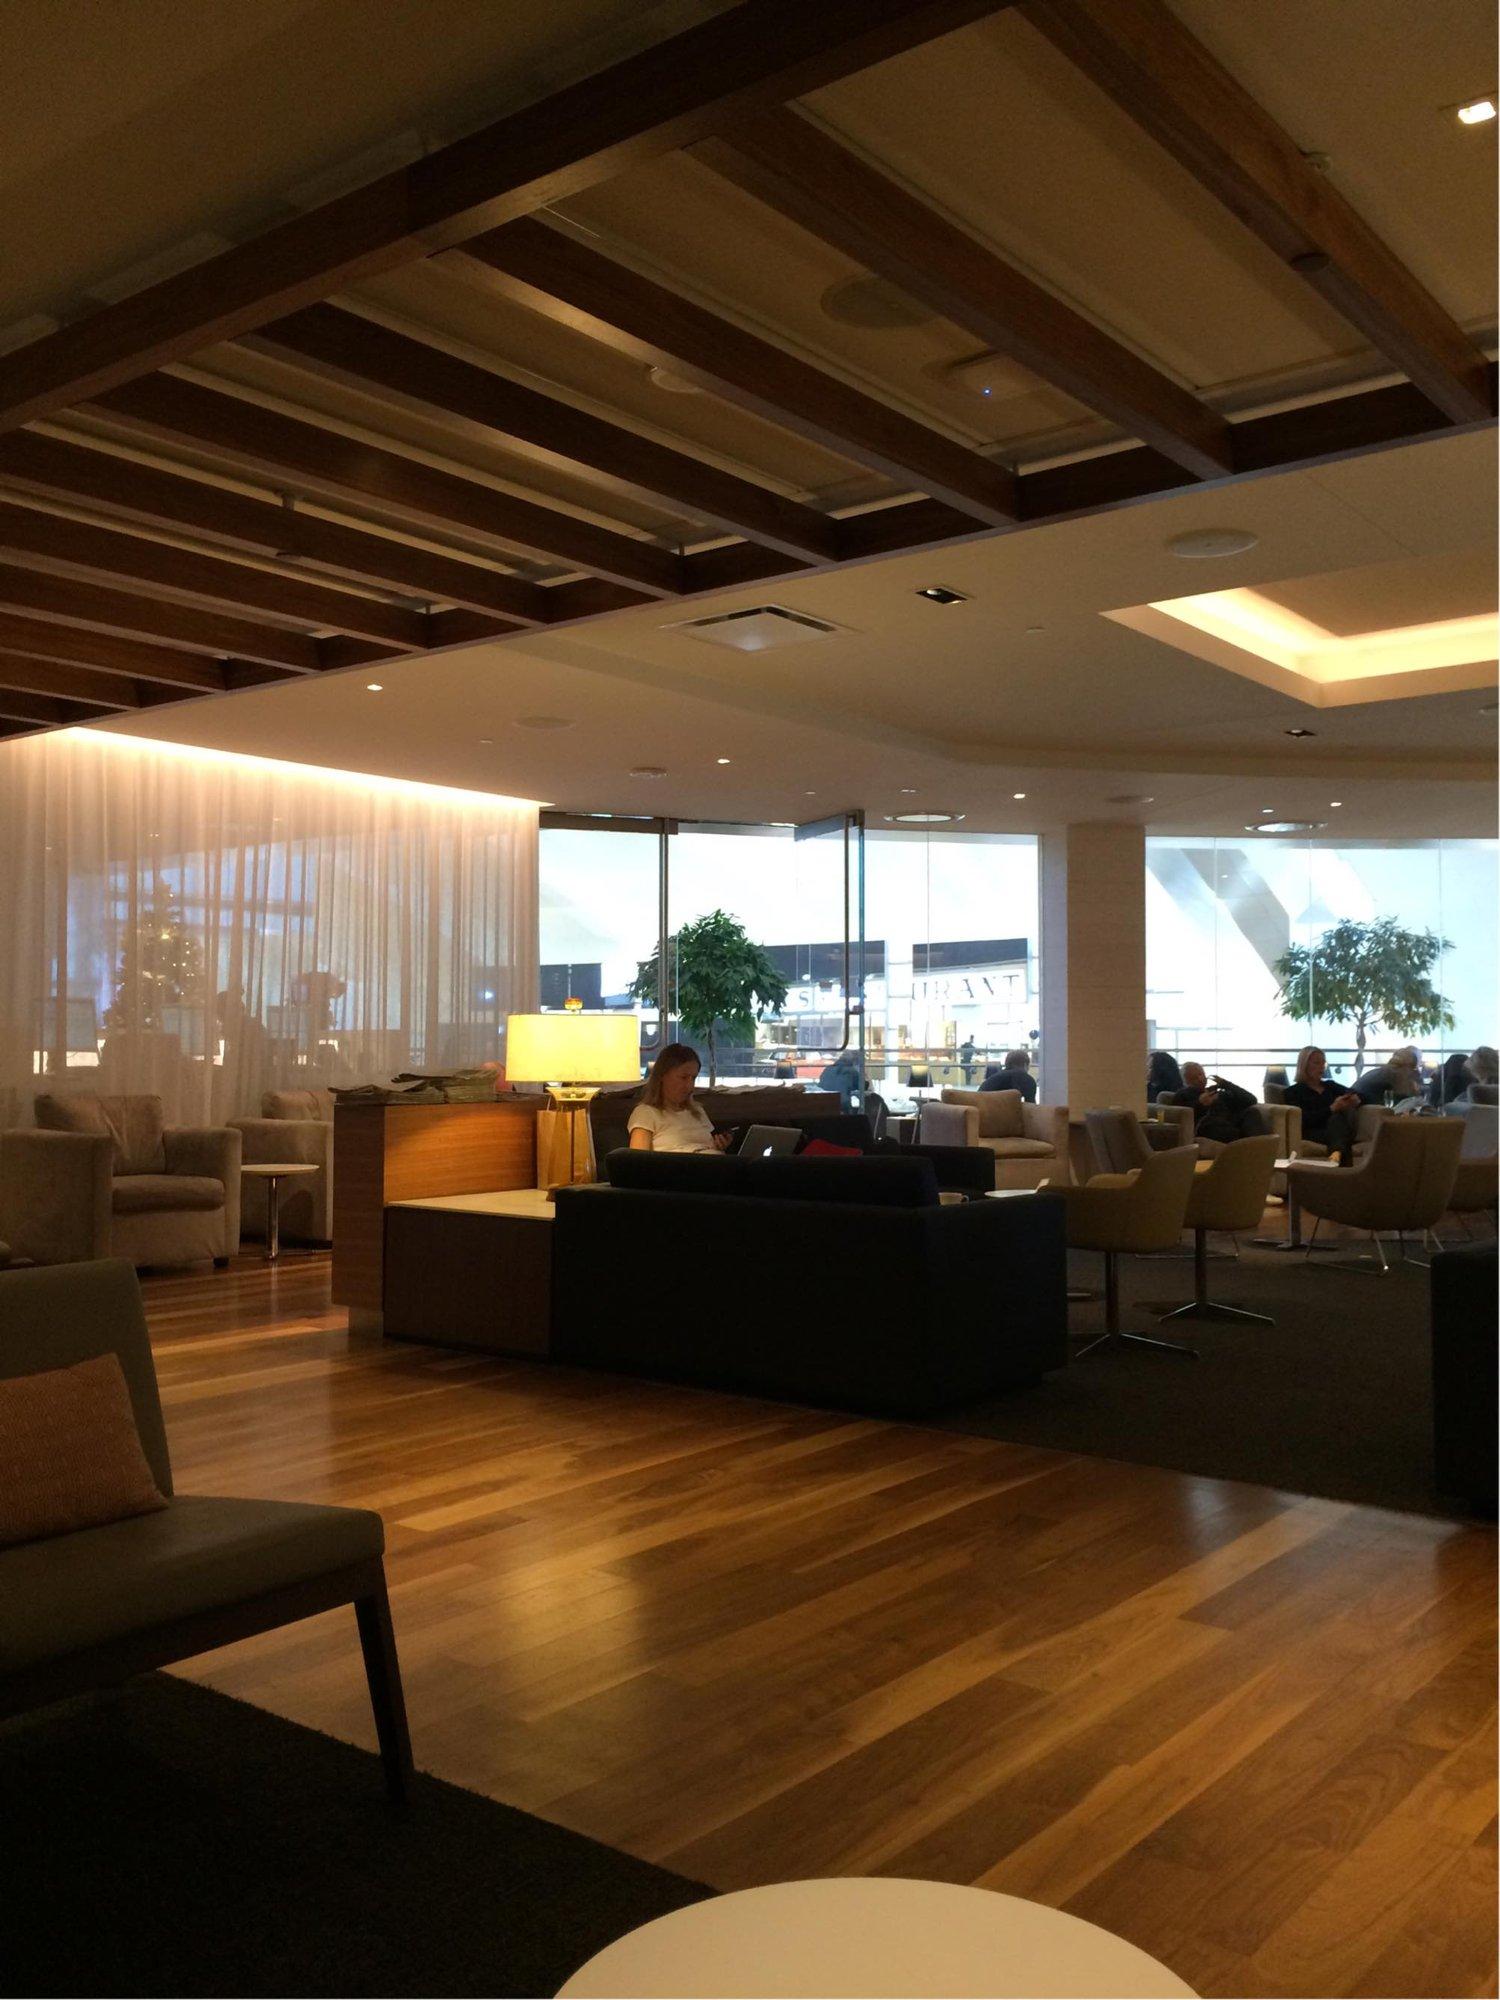 Star Alliance Business Class Lounge image 25 of 72